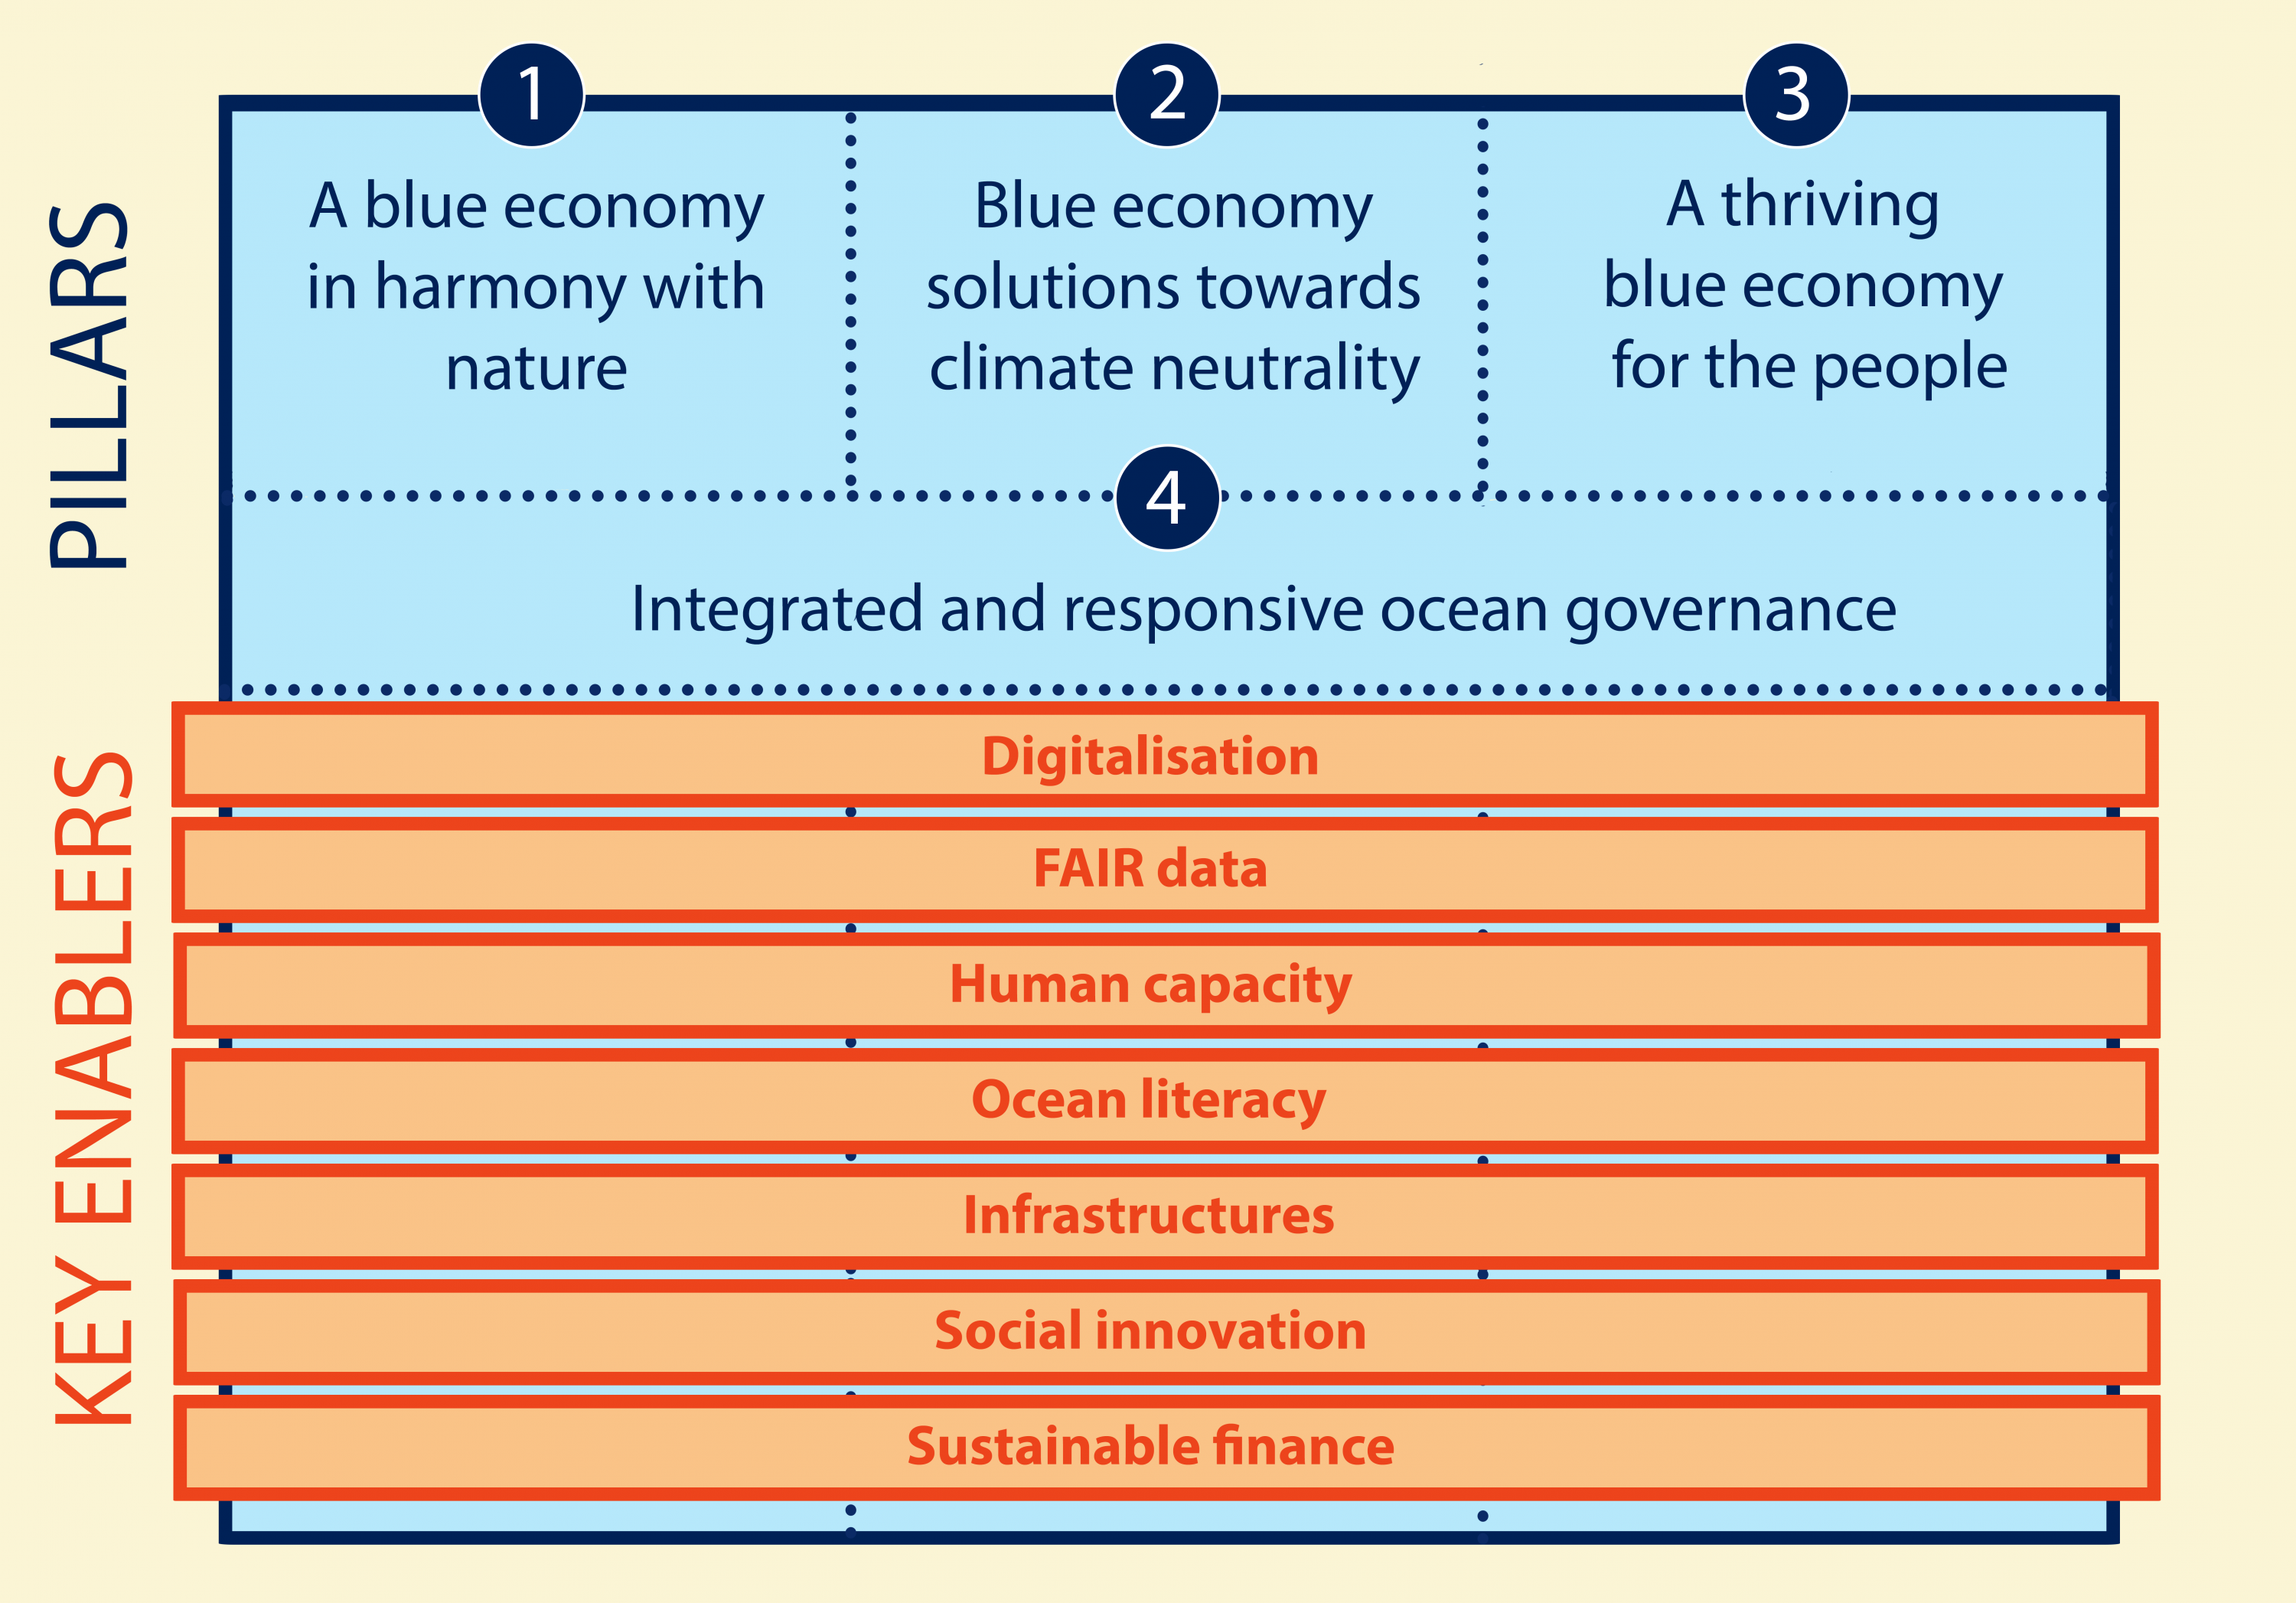 &quot;Figure 1: Sustainable Blue Economy Partnership pillars and key enablers (SRIA 2021). &quot;